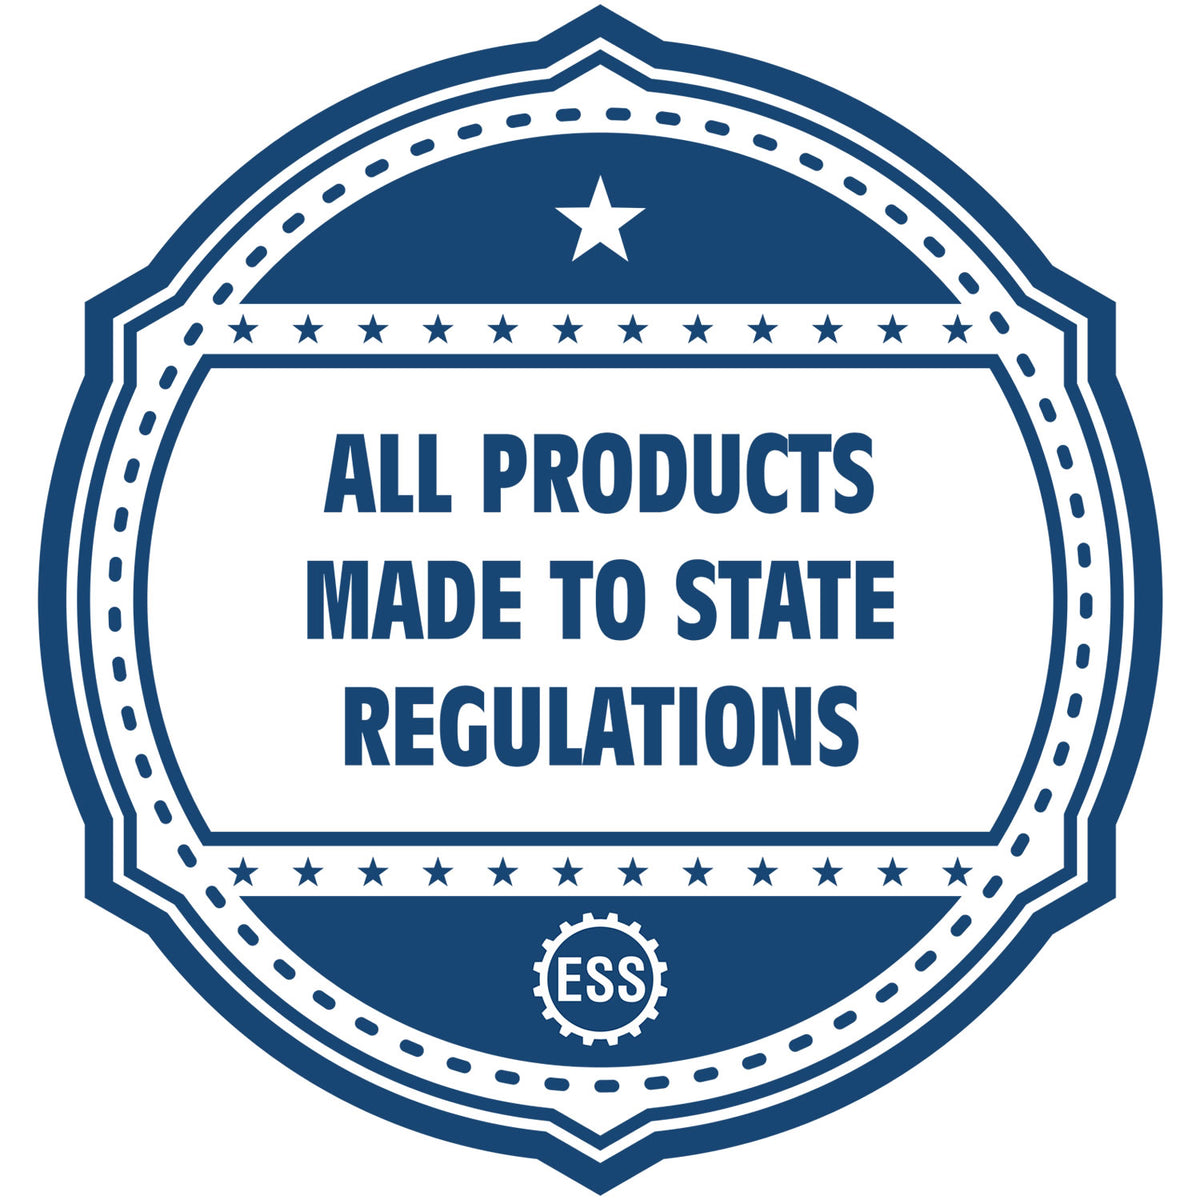 An icon or badge element for the Slim Pre-Inked New Jersey Architect Seal Stamp showing that this product is made in compliance with state regulations.